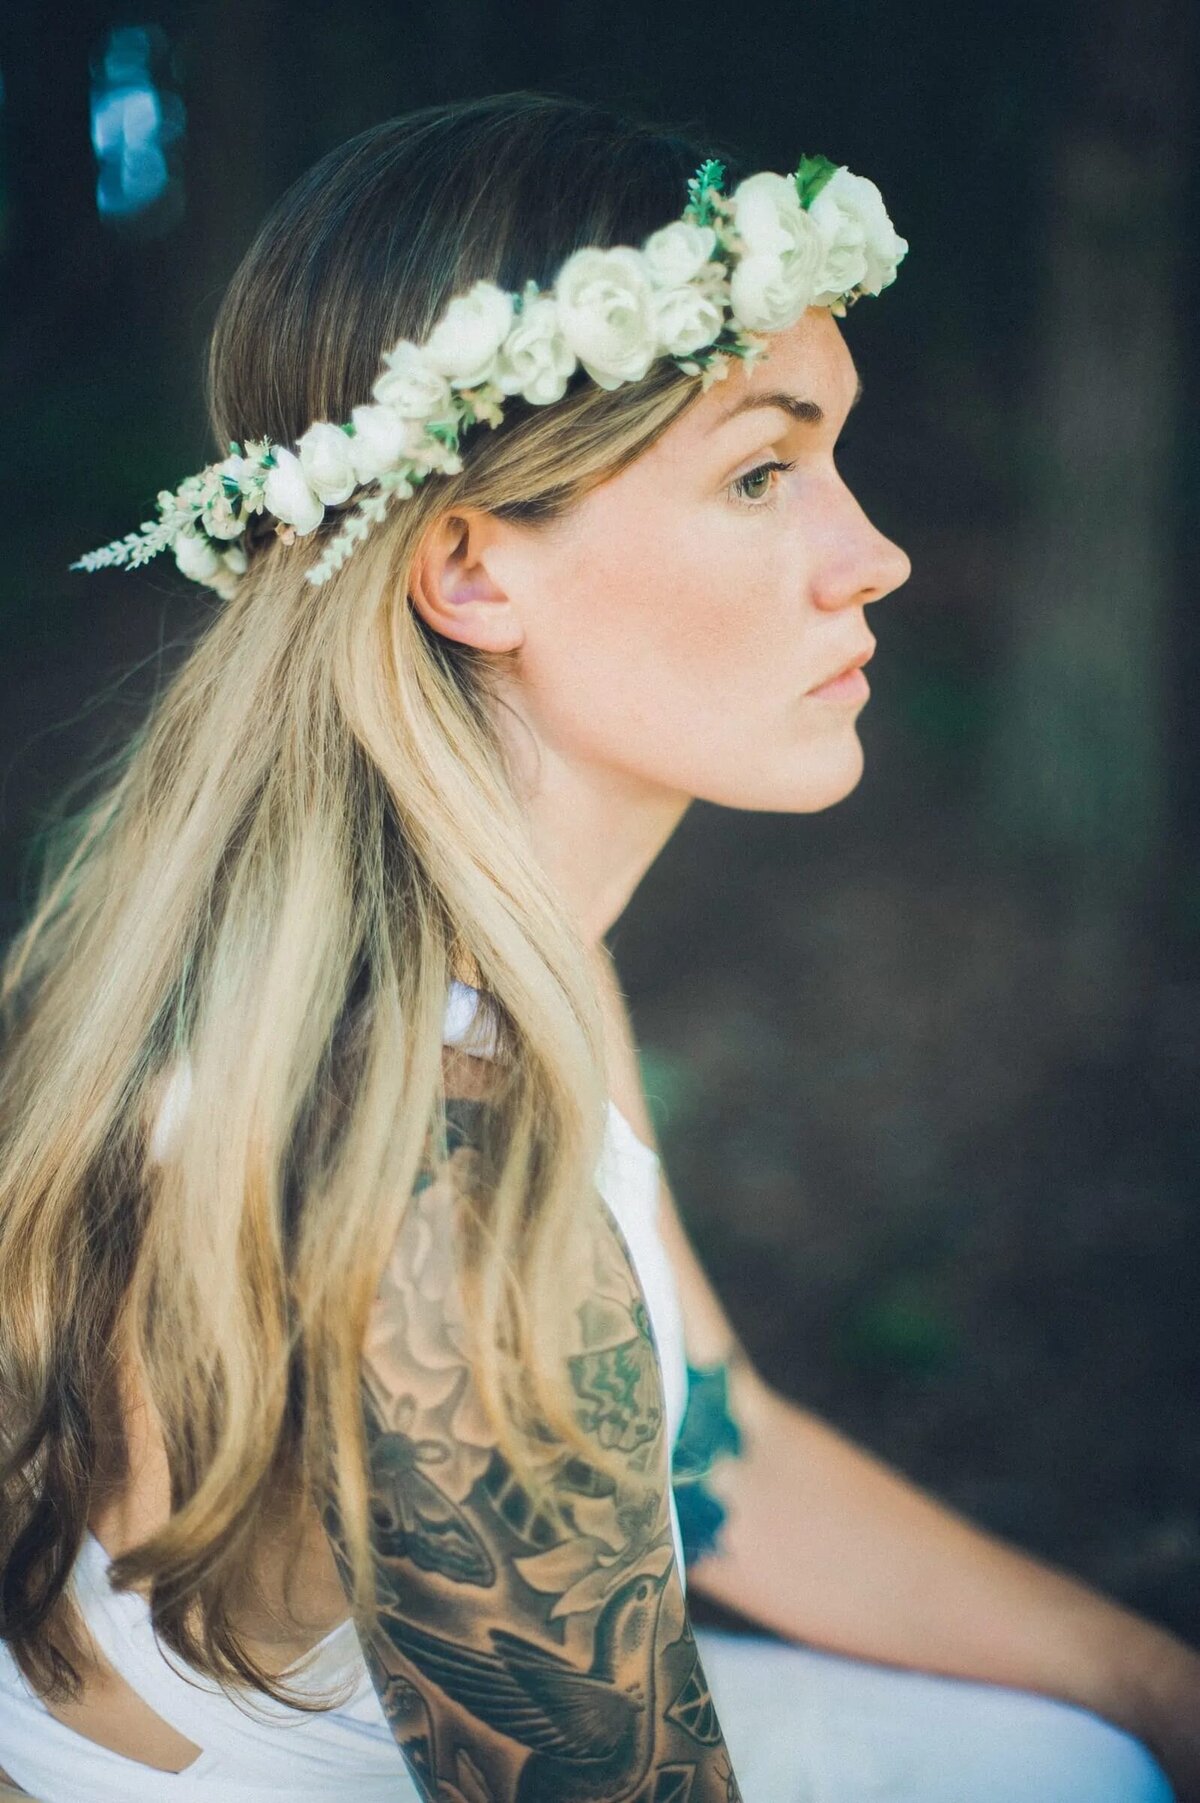 A contemplative woman wearing a floral crown, with her blonde hair cascading down her shoulder, set against a tranquil forest backdrop.